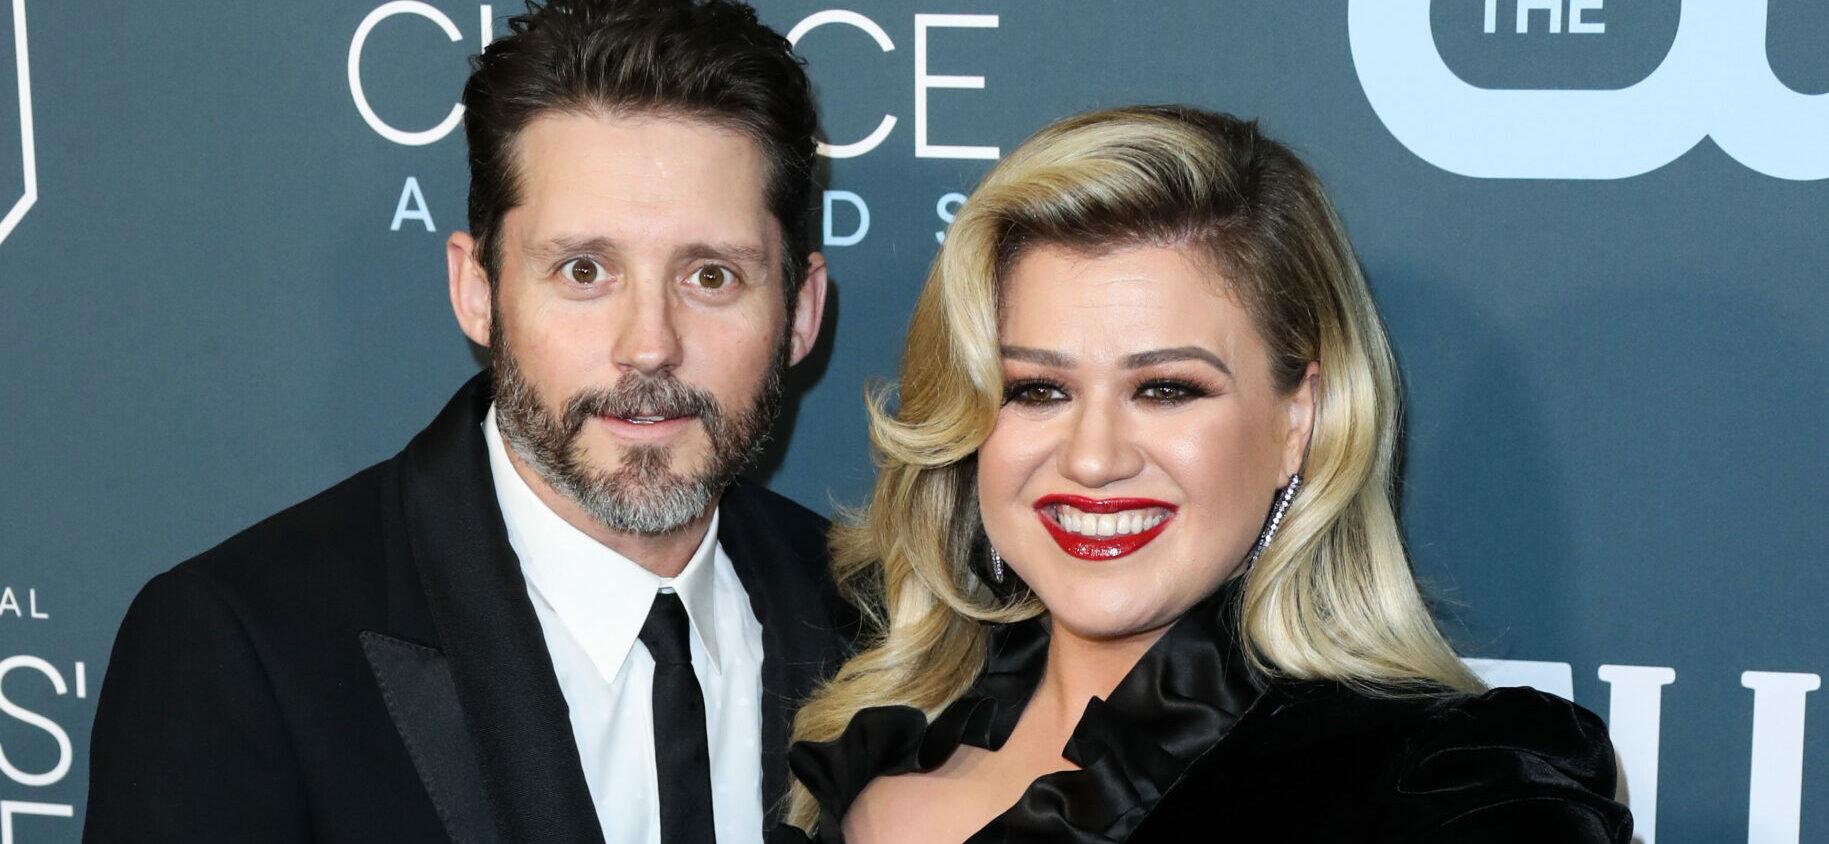 ‘The Voice’ Star Kelly Clarkson Says ‘I’ll Never Marry Again’ Following Nasty Divorce